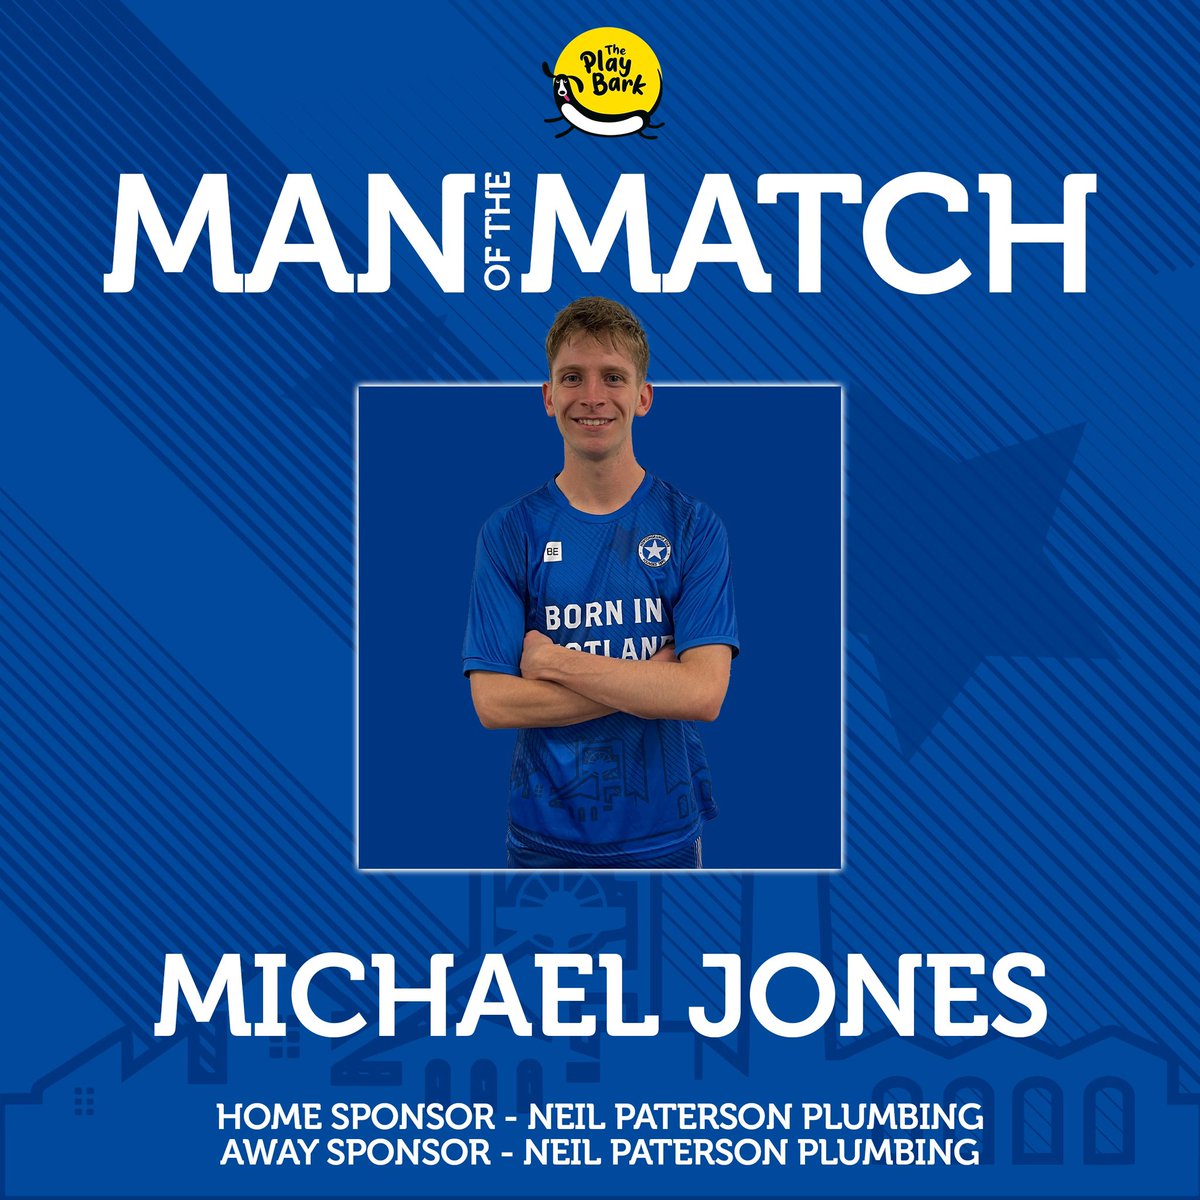 With 2 assists and a brilliant performance today’s Play Bark Man of the Match award goes to Mikey Jones! Well done Jonesy 👏🏼